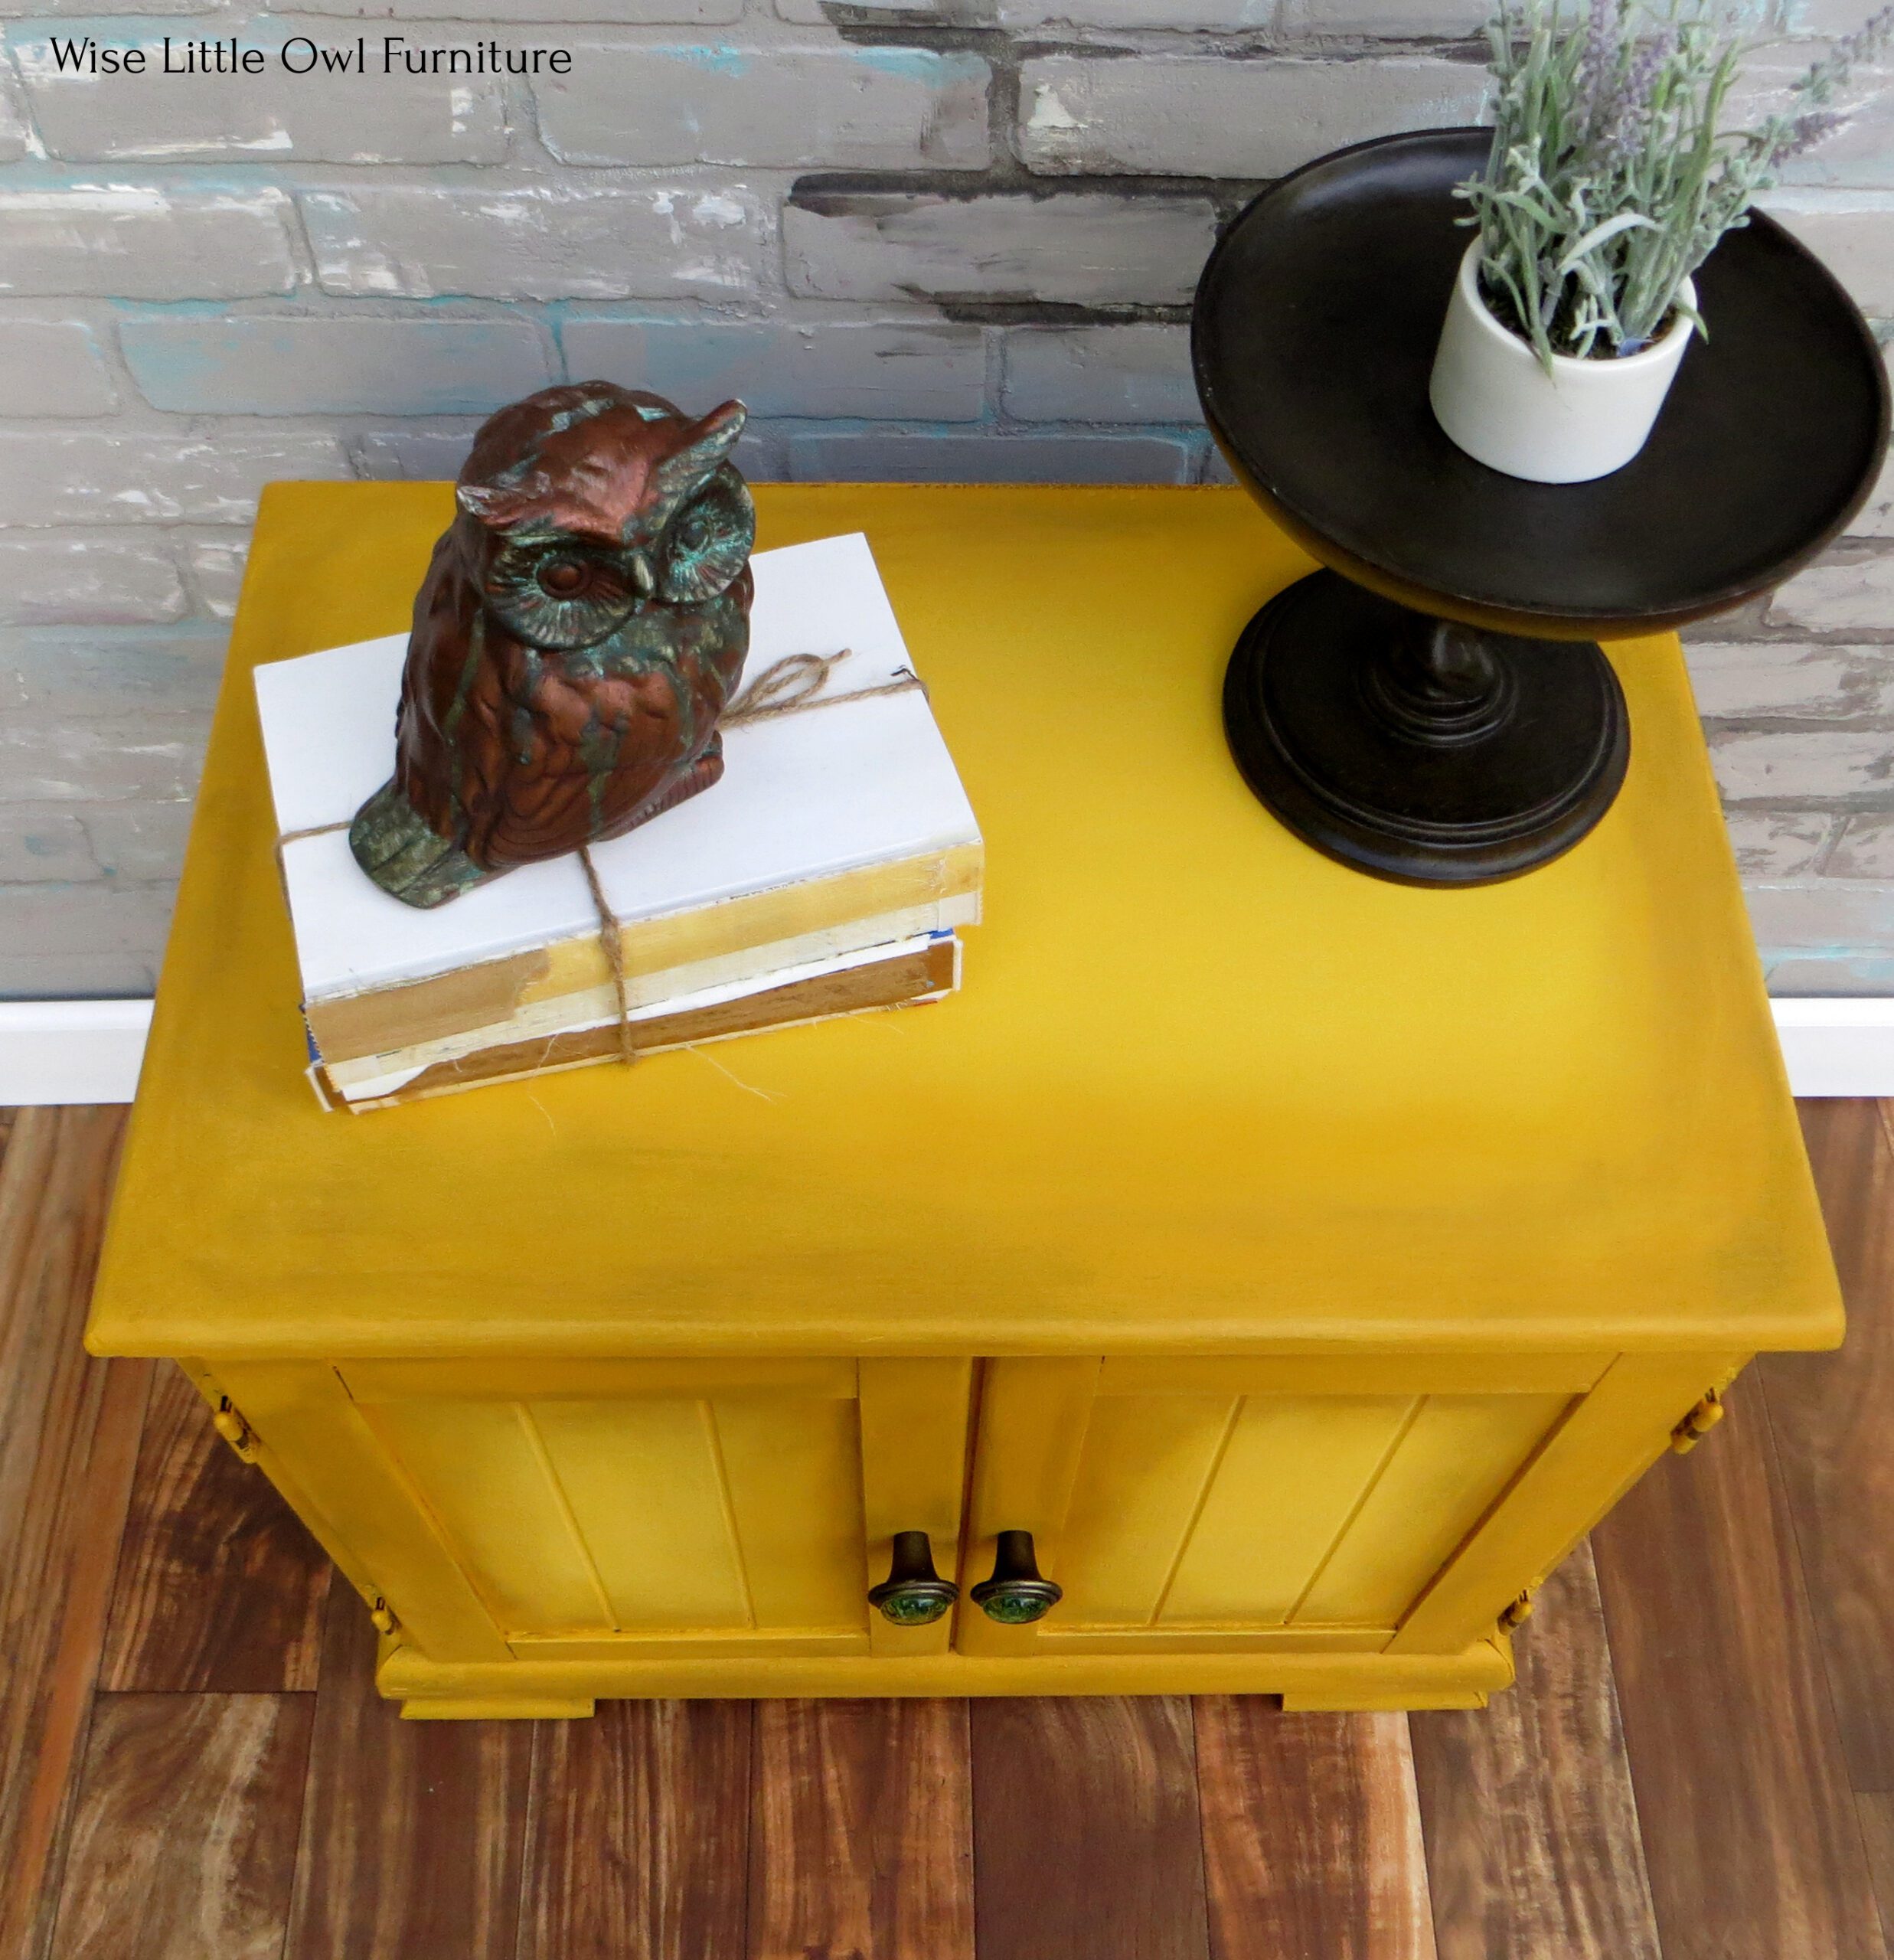 Learn How to Paint a Mustard Accent Table